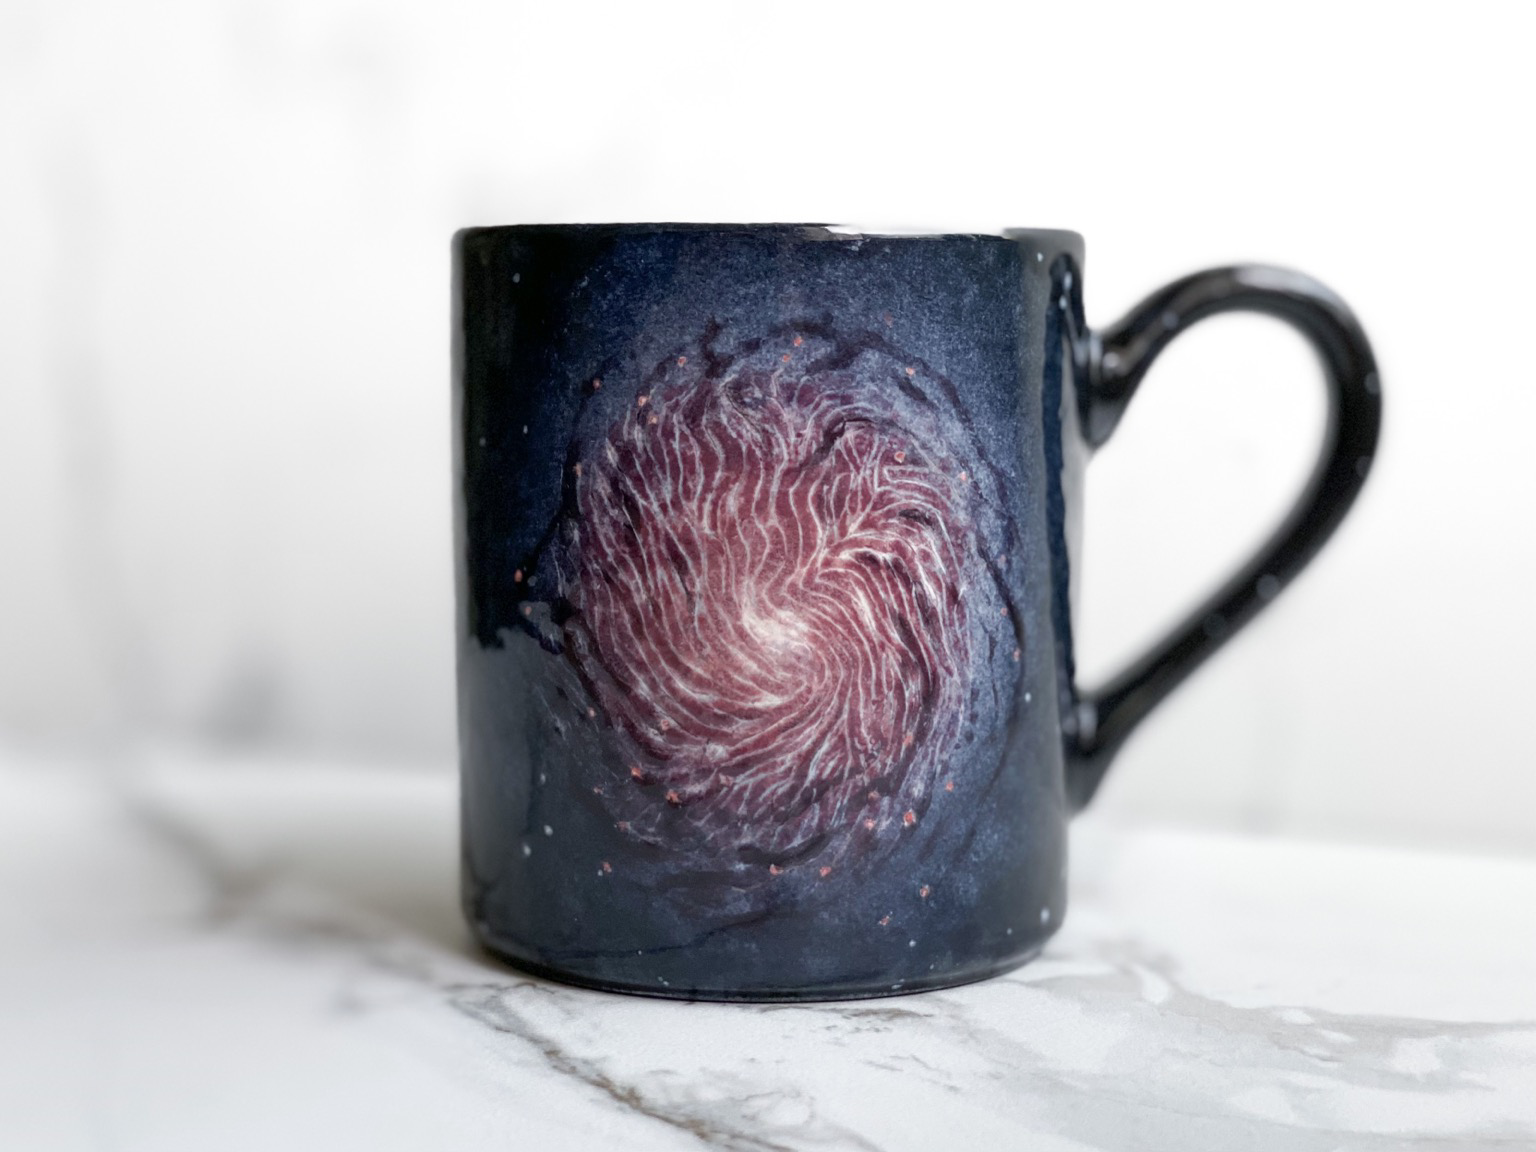 Mug featuring galaxy with magnetic fields